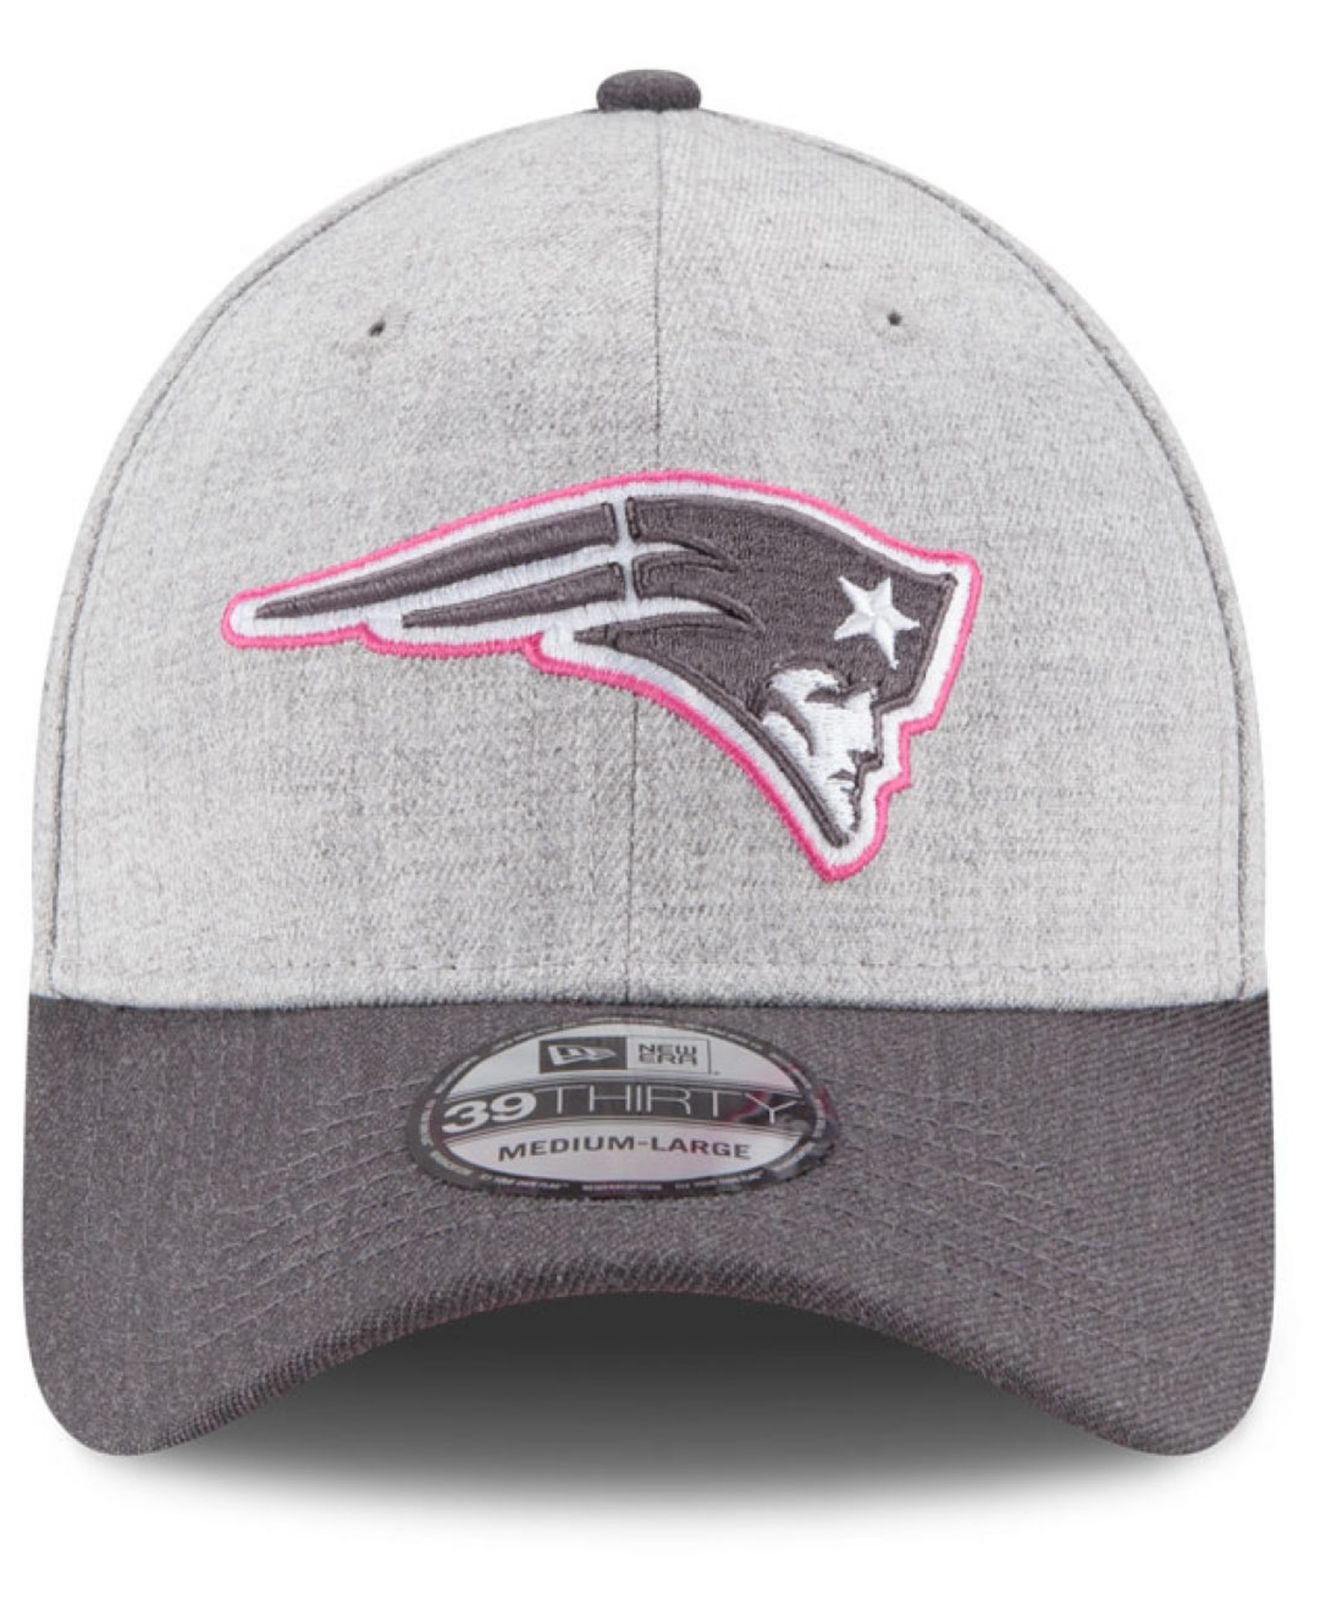 nfl breast cancer hats